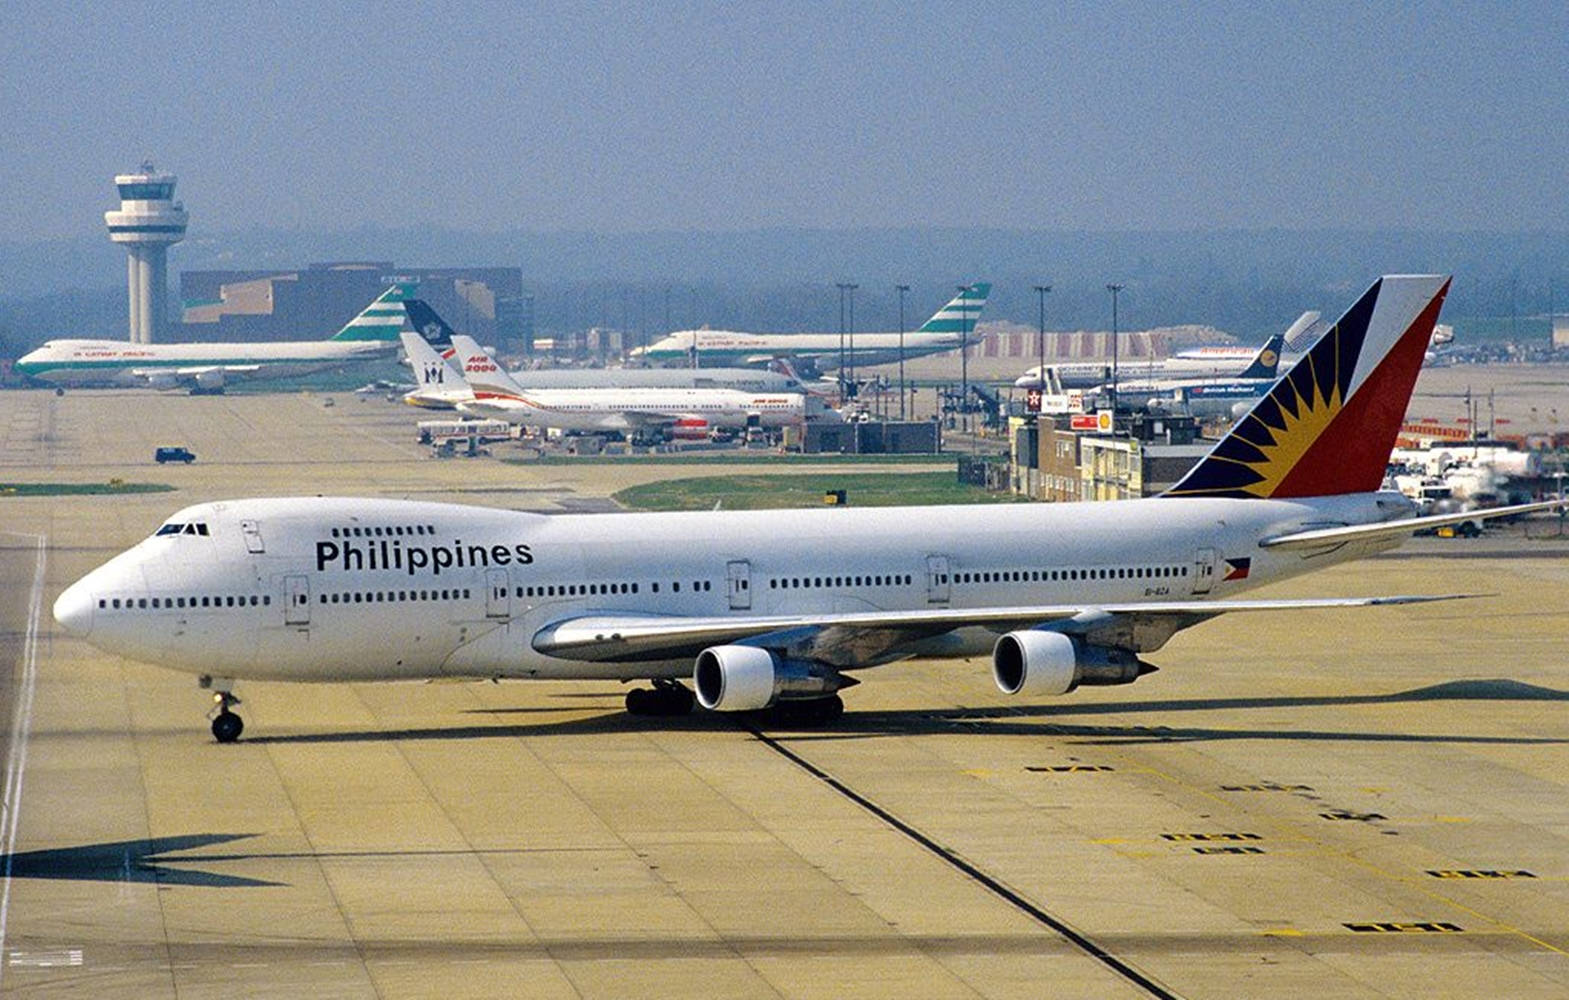 Philippine Airlines 1569 X 1000 Wallpaper